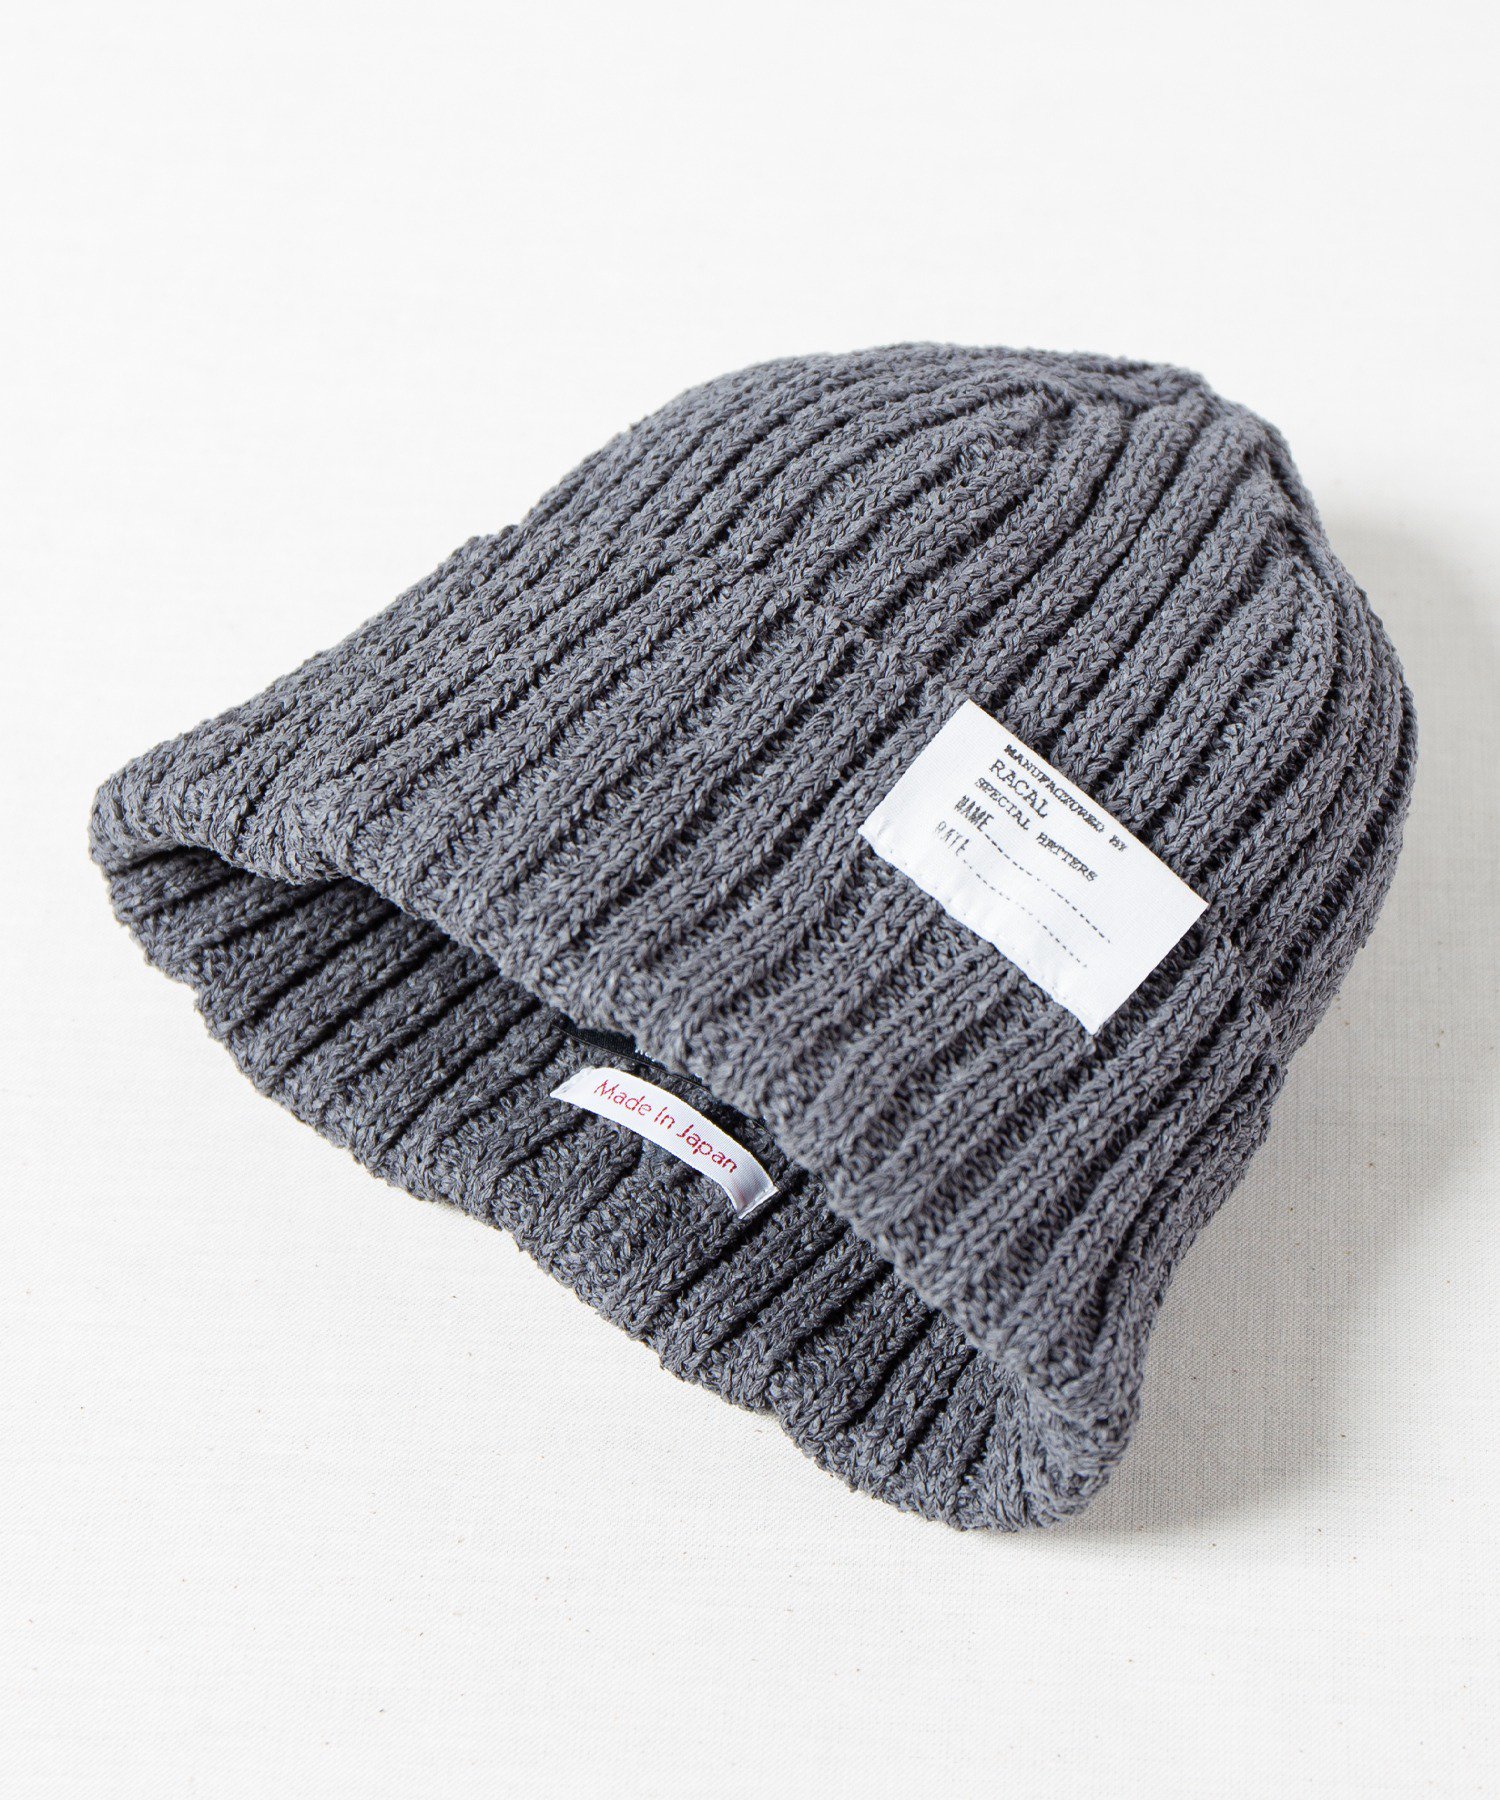 Racal Japanese Paper Standard Knit Cap 1219 和紙混紡スタンダードニットキャップ|高品質で人気のニットワッチ  - Ray's Store / レイズストア